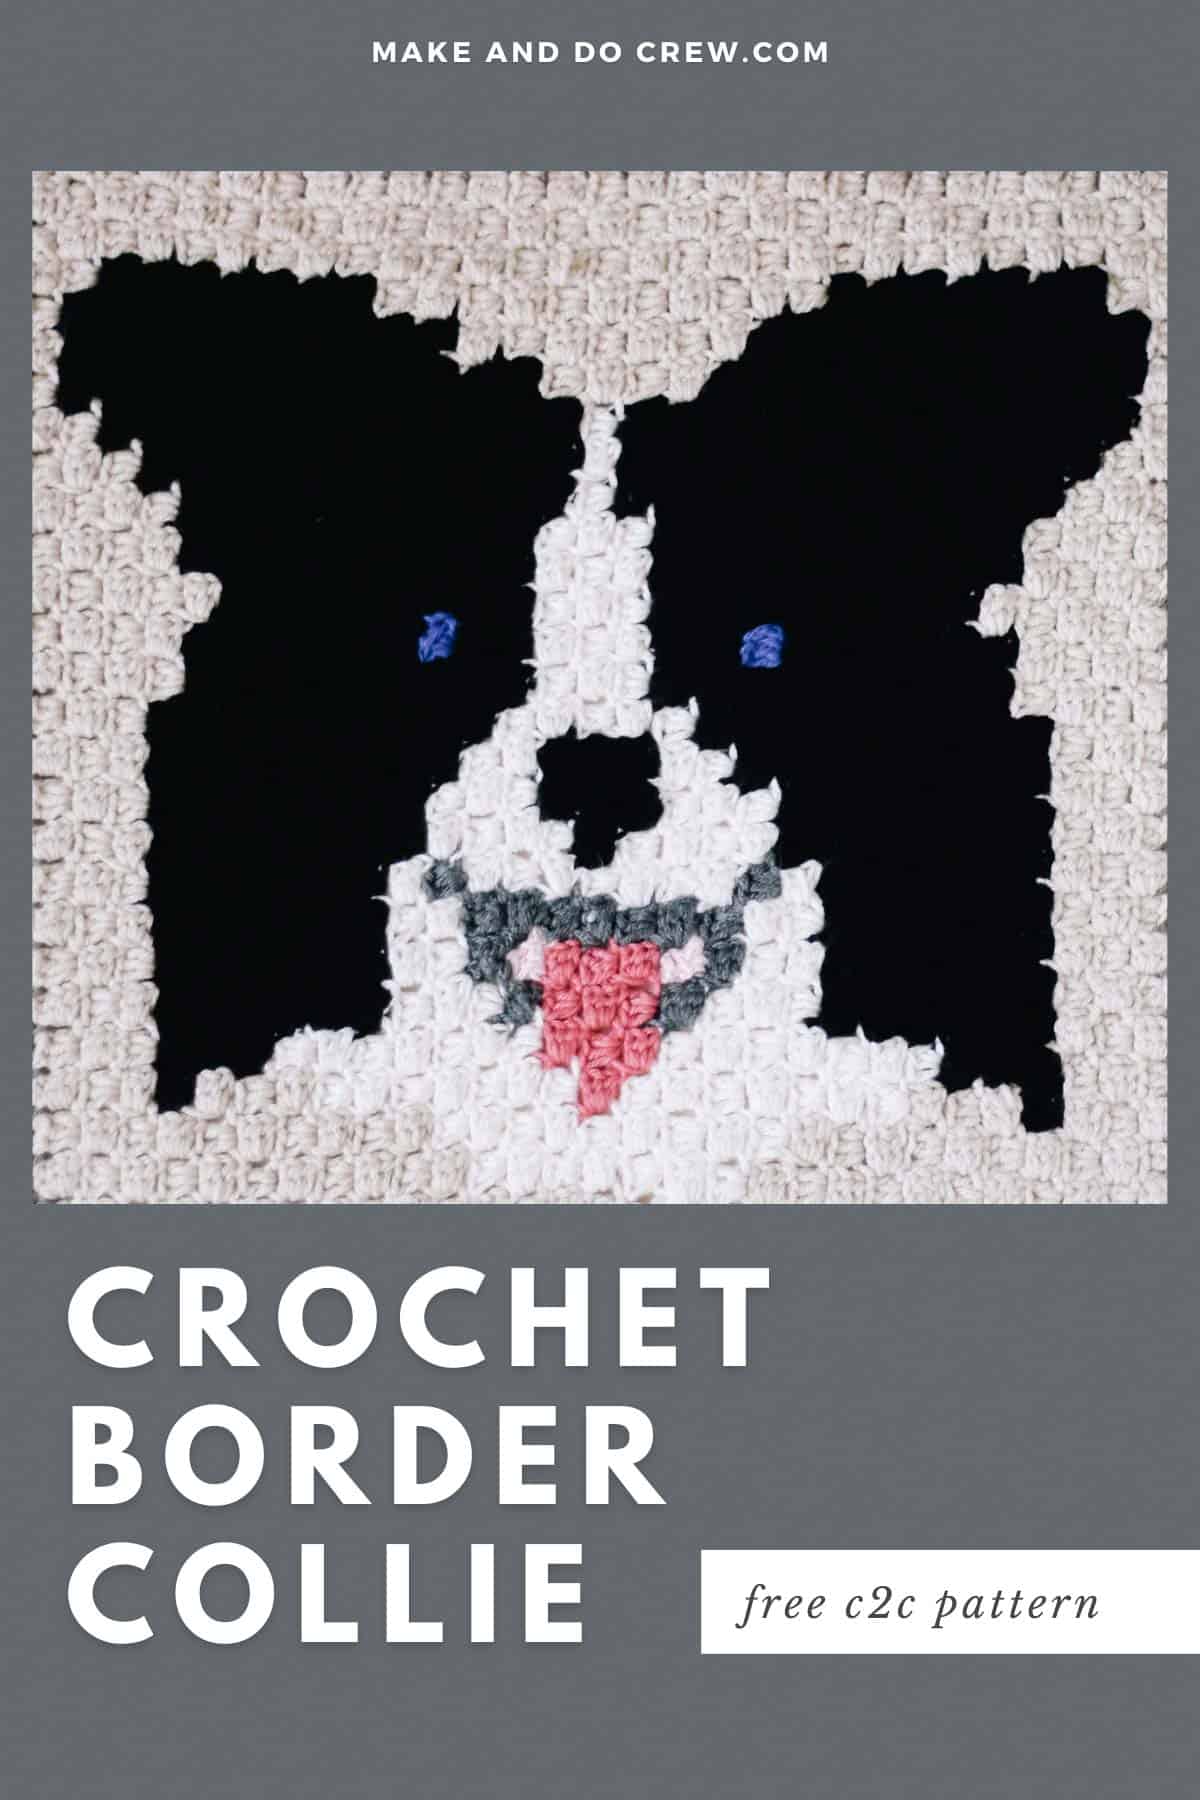 This image shows a corner to corner crochet block with a crocheted Border Collie's face on it.